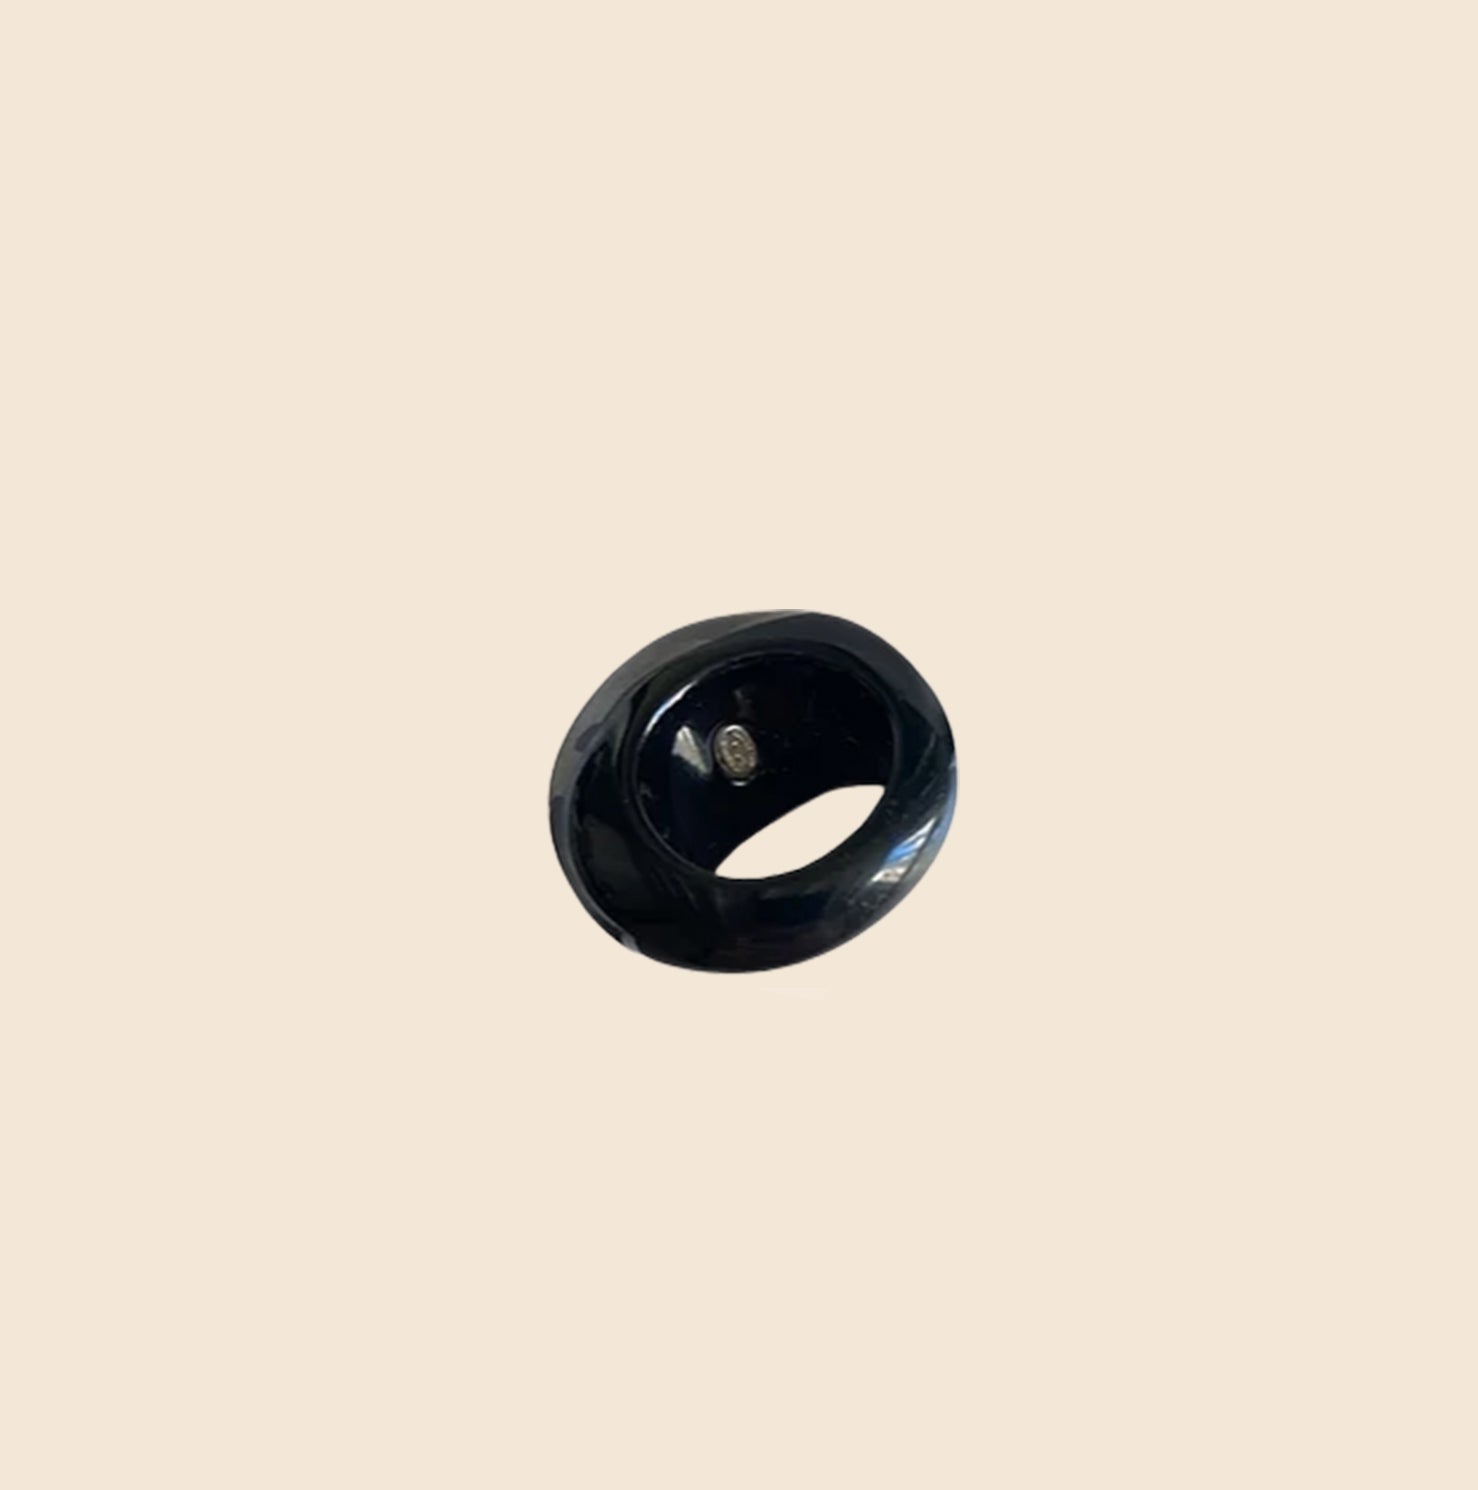 Chanel CC Resin Band Ring - Size 6.5